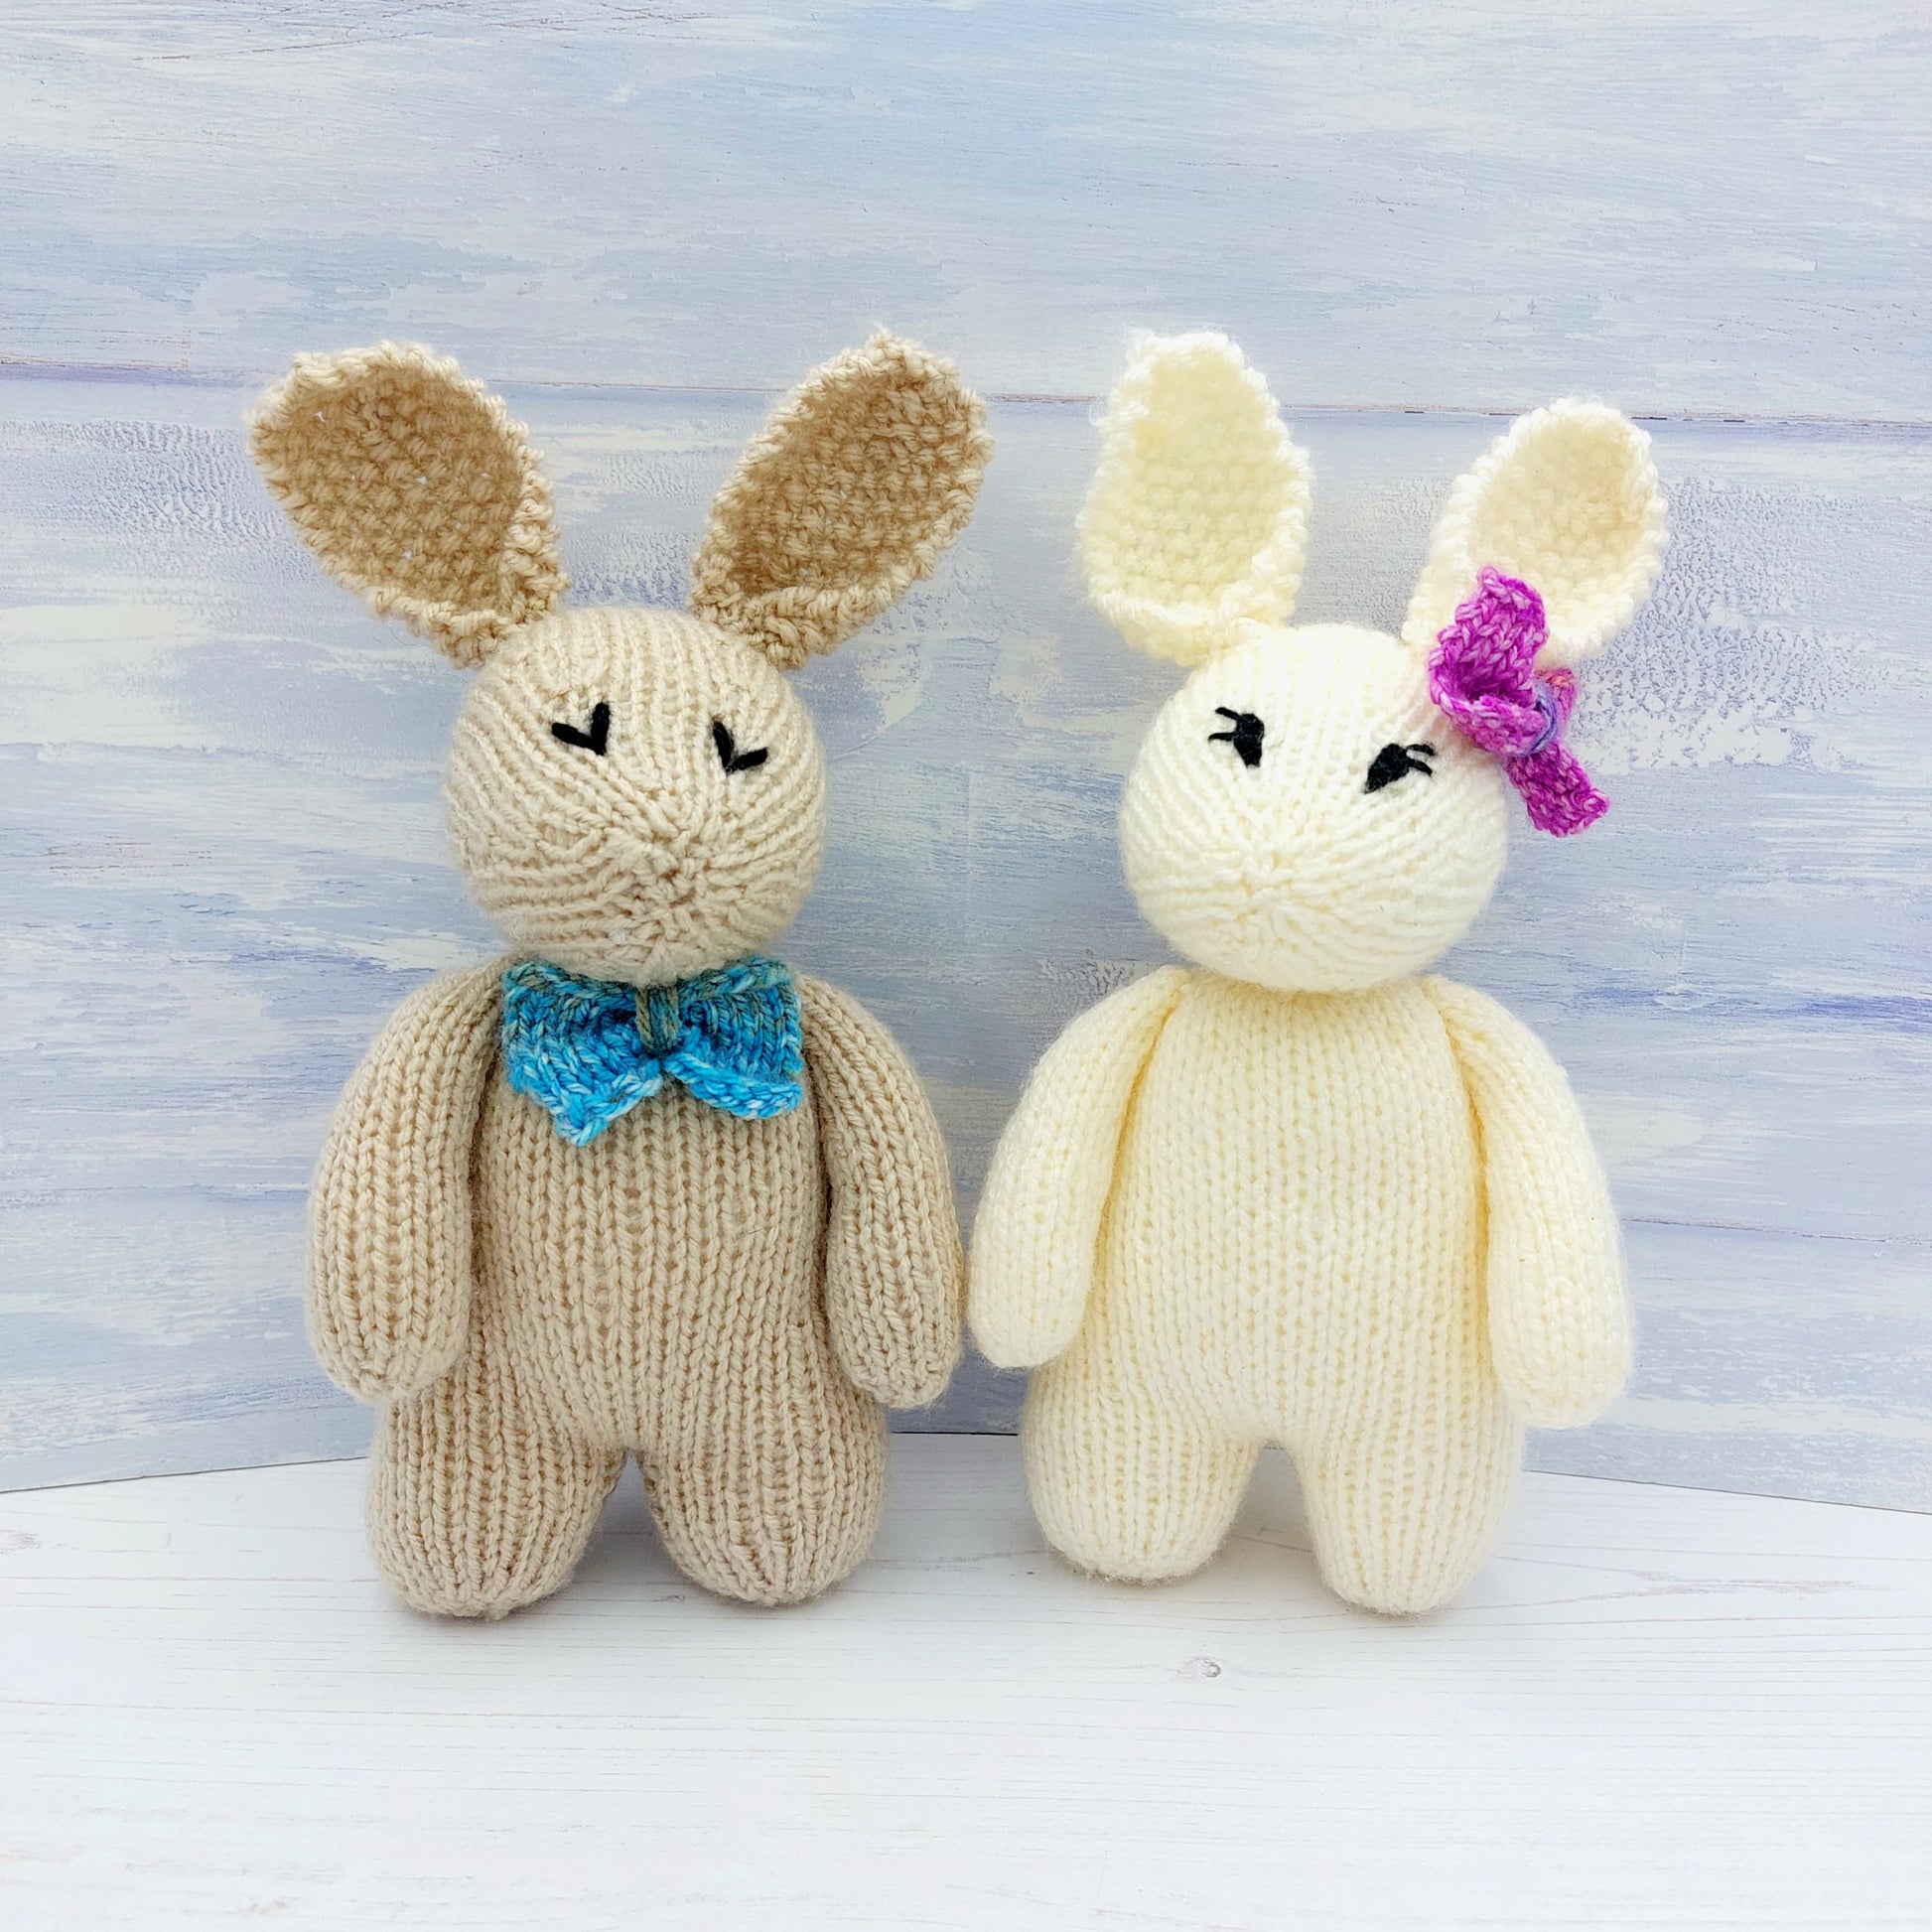 Knitted Rabbits made from knitting kit